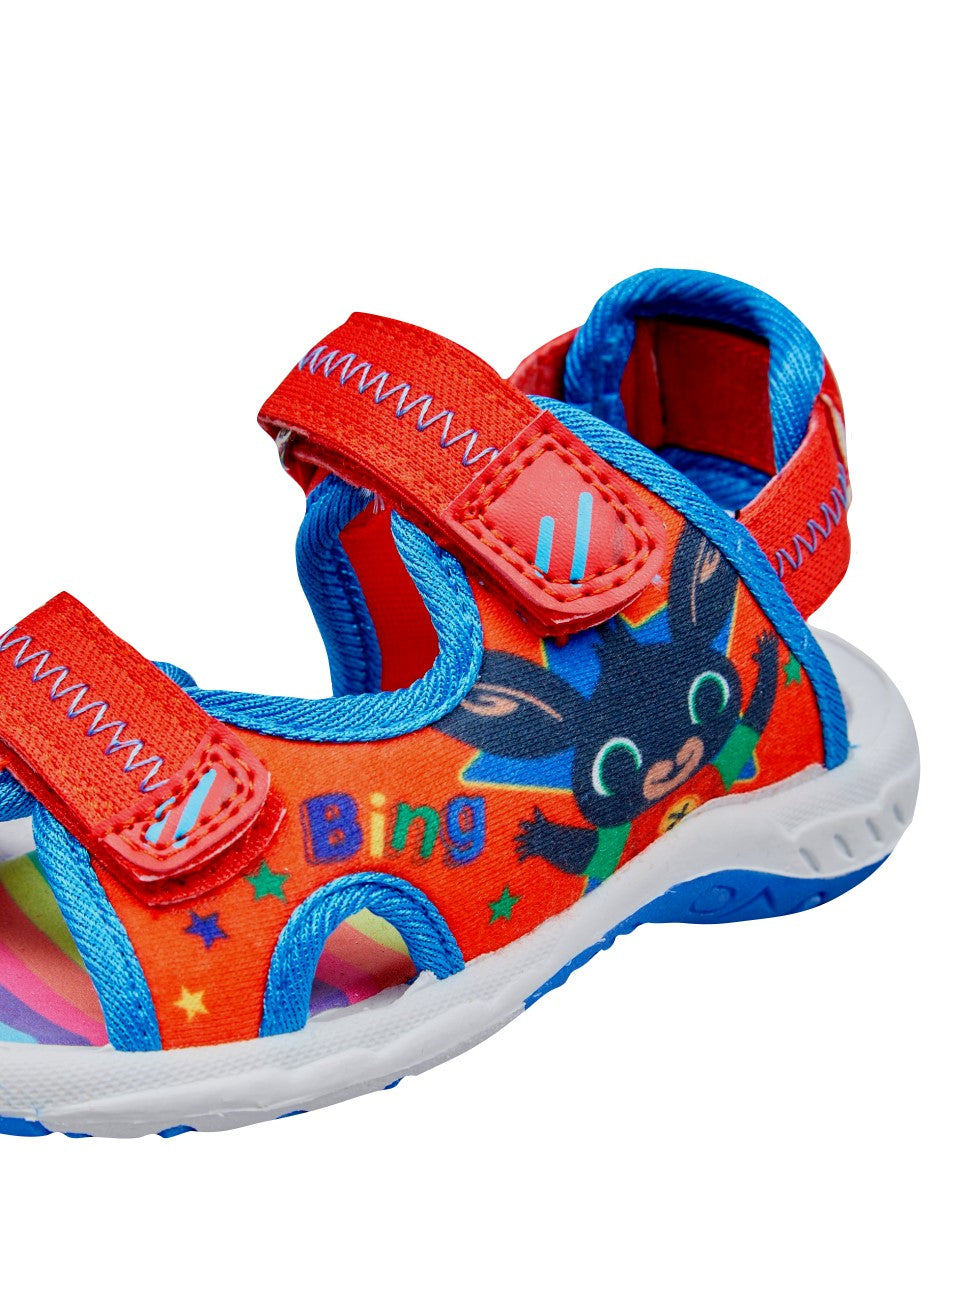 Bing Bunny Kids Easy Close Red and Blue Sports Sandals